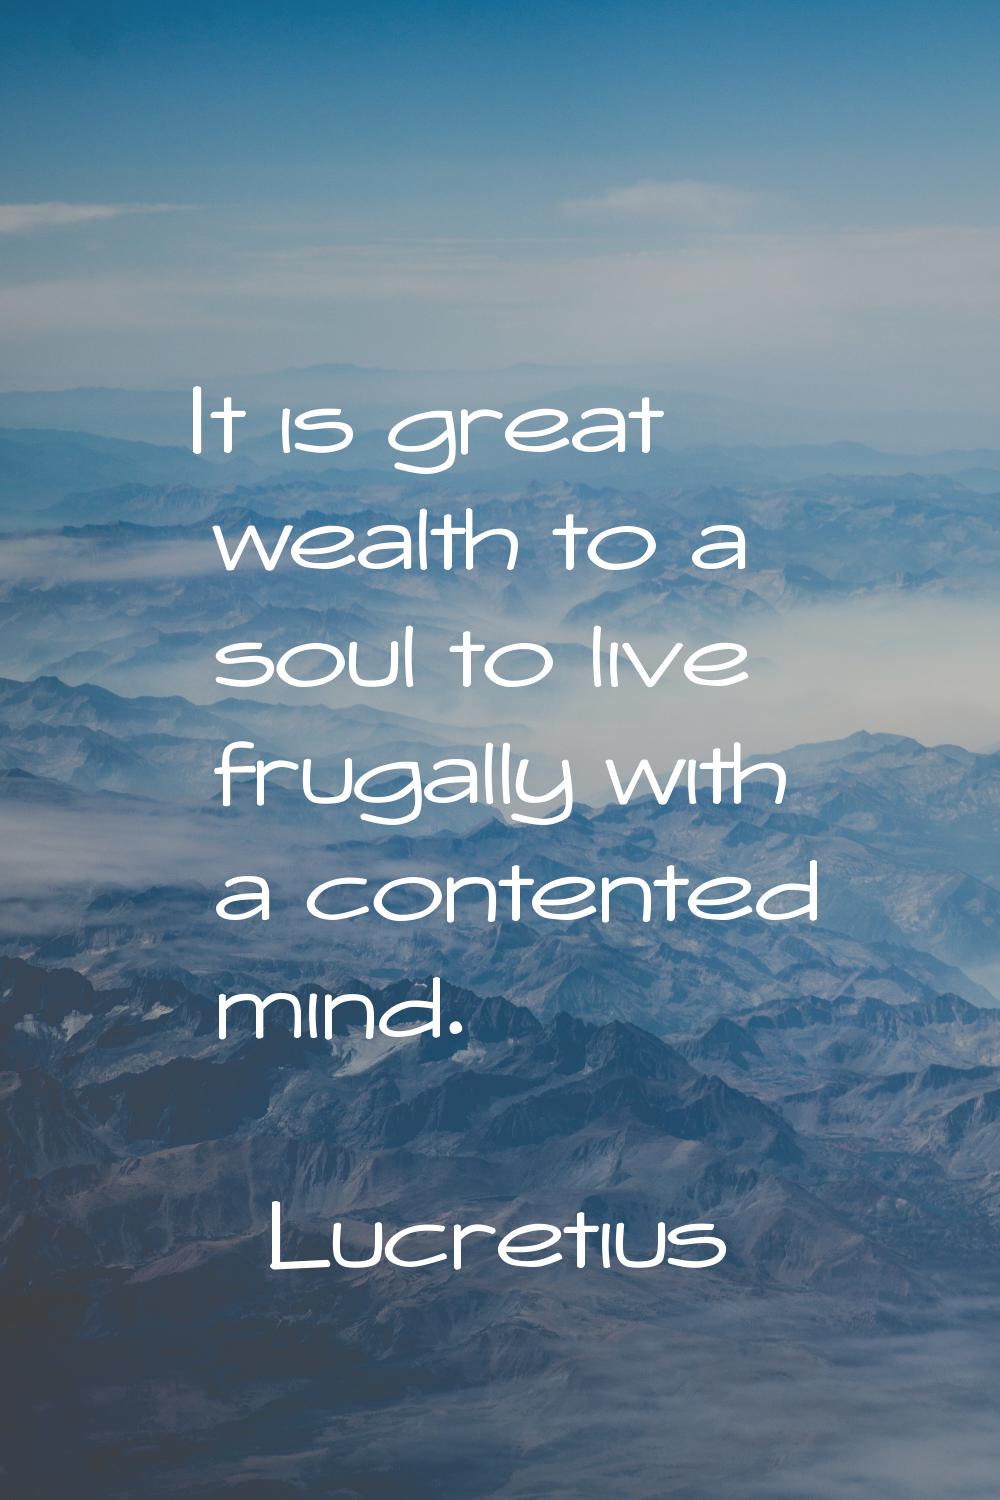 It is great wealth to a soul to live frugally with a contented mind.